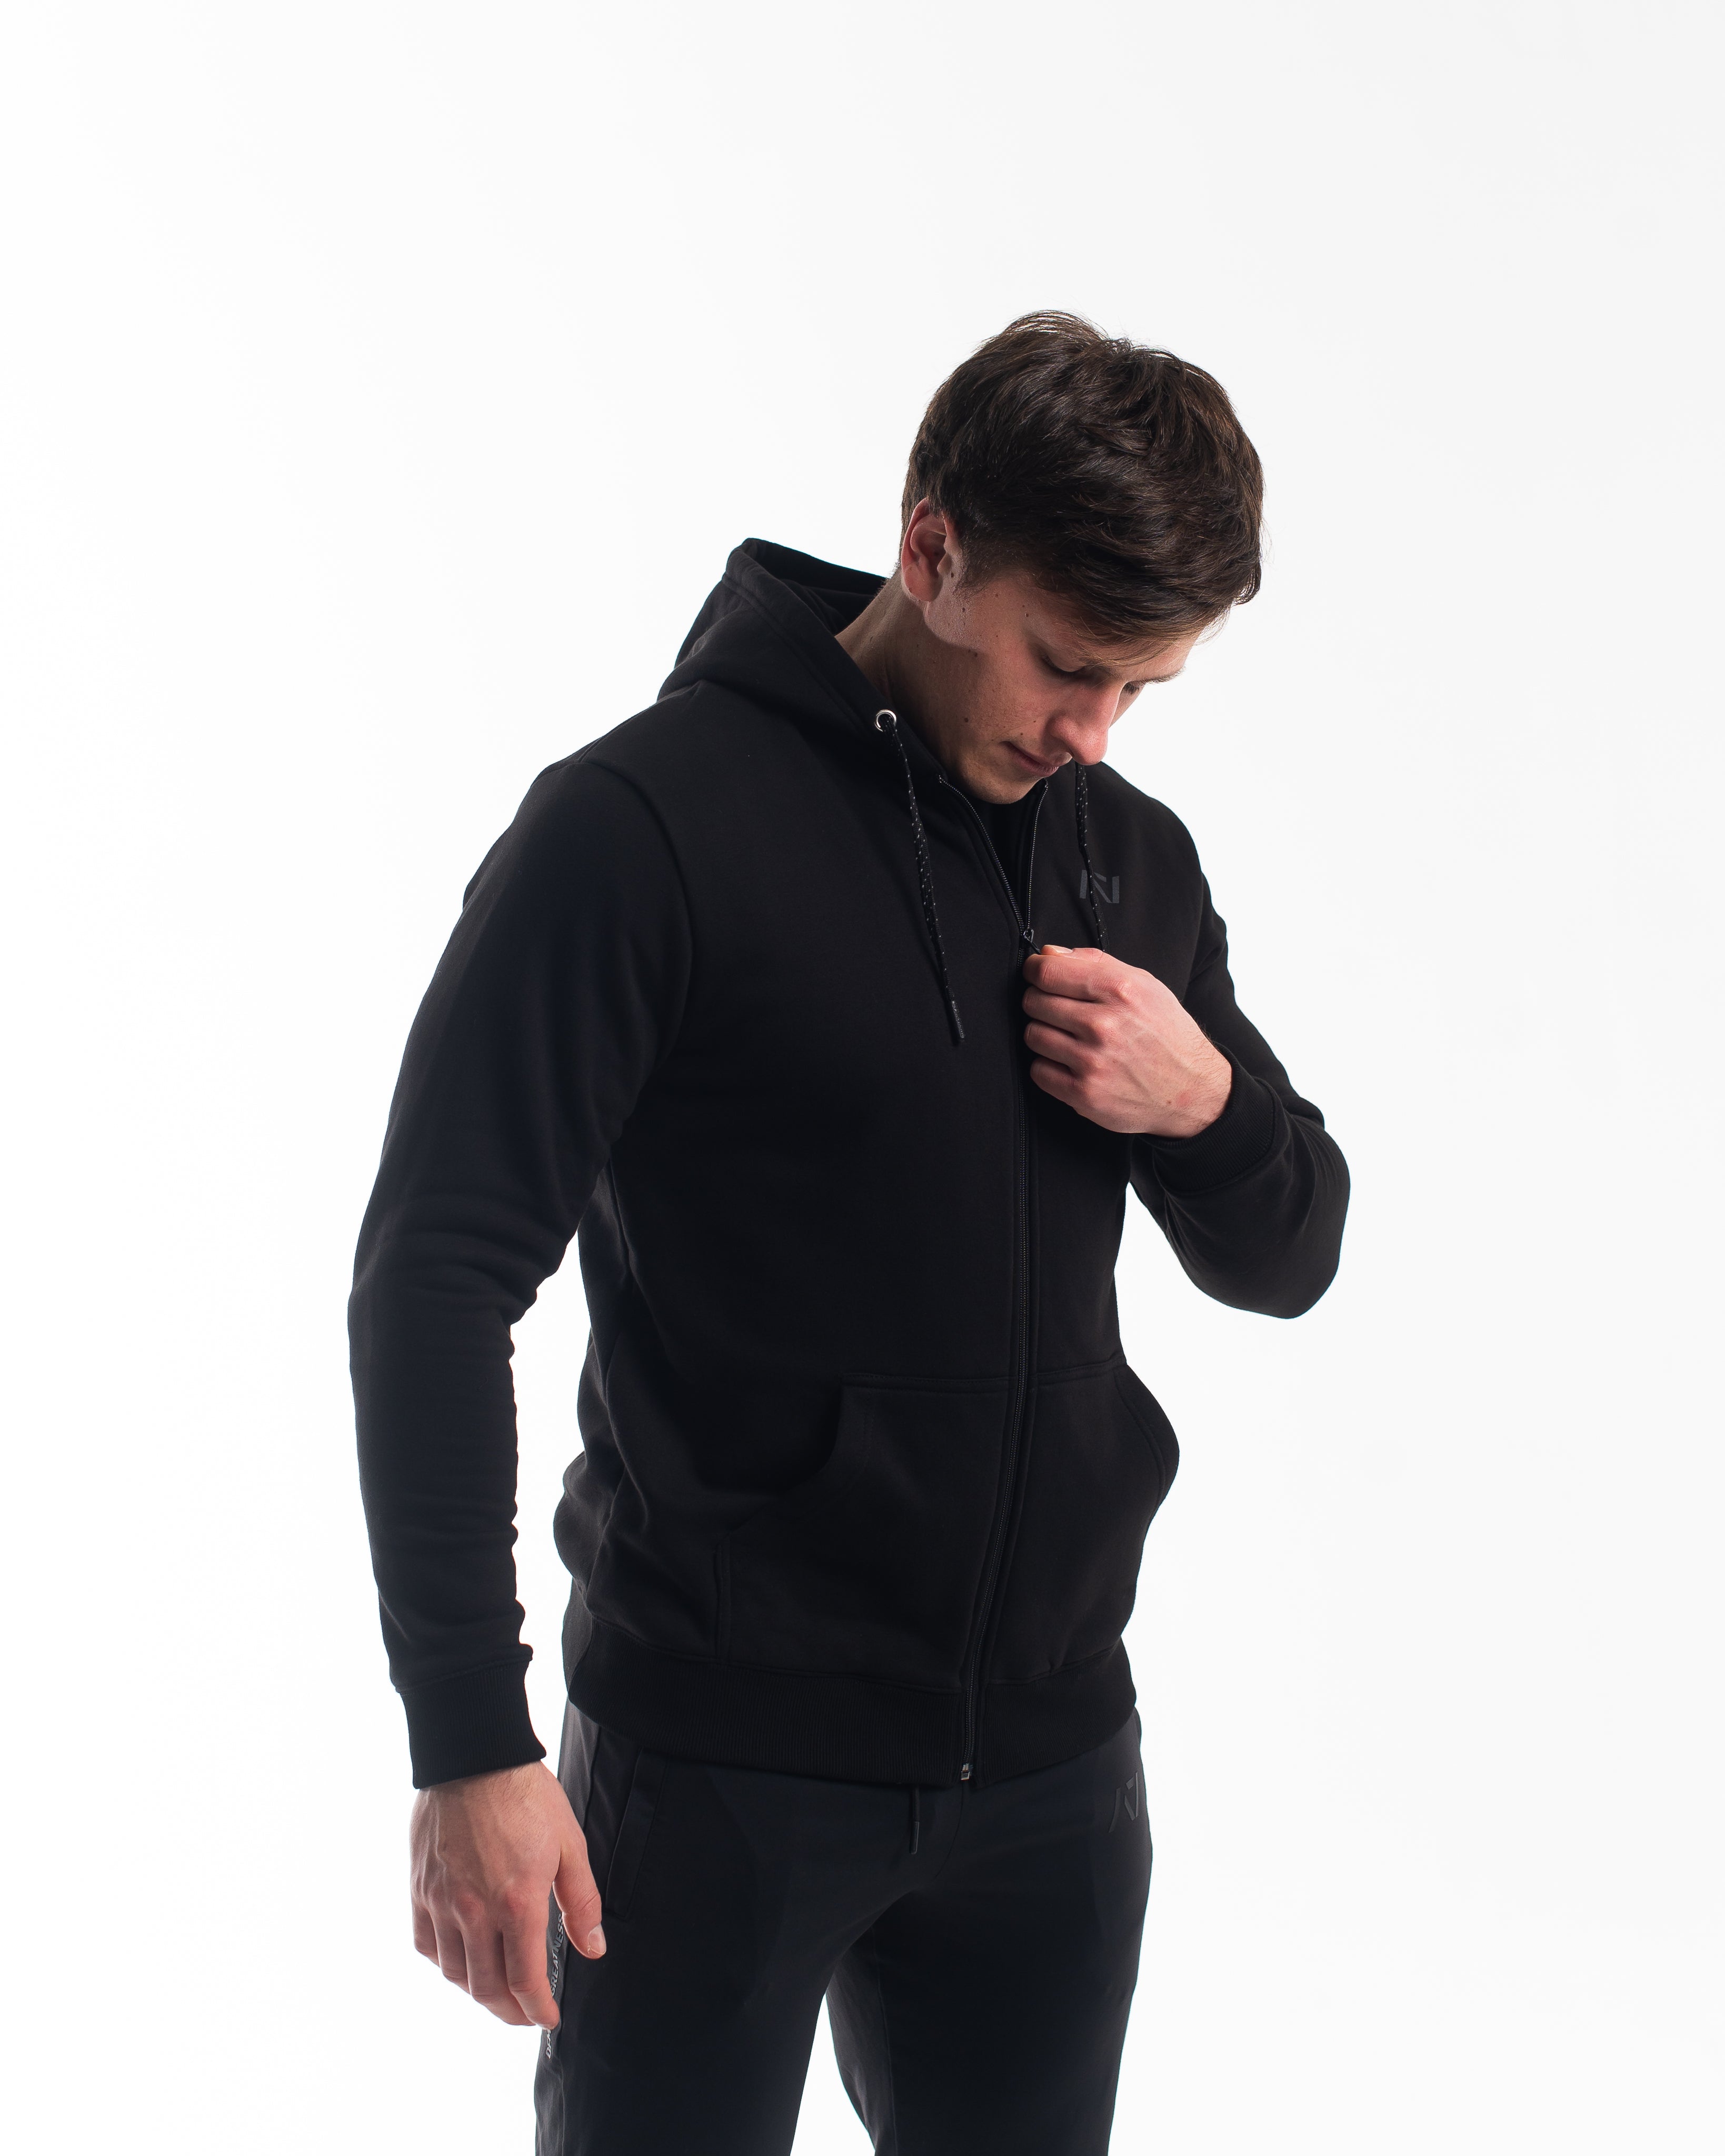 Stealth Demand Greatness is a zip up hoodie great for casual wear or lifting in the gym. Purchase Stealth zip up hoodie in UK and Europe from A7 UK. A7 have the best Bar Grip Tshirts, shipping to UK and Europe from A7 UK. A7UK supplies the best Powerlifting apparel for all your workouts. Genouill�res powerlifting shipping to France, Spain, Ireland, Germany, Italy, Sweden and EU.